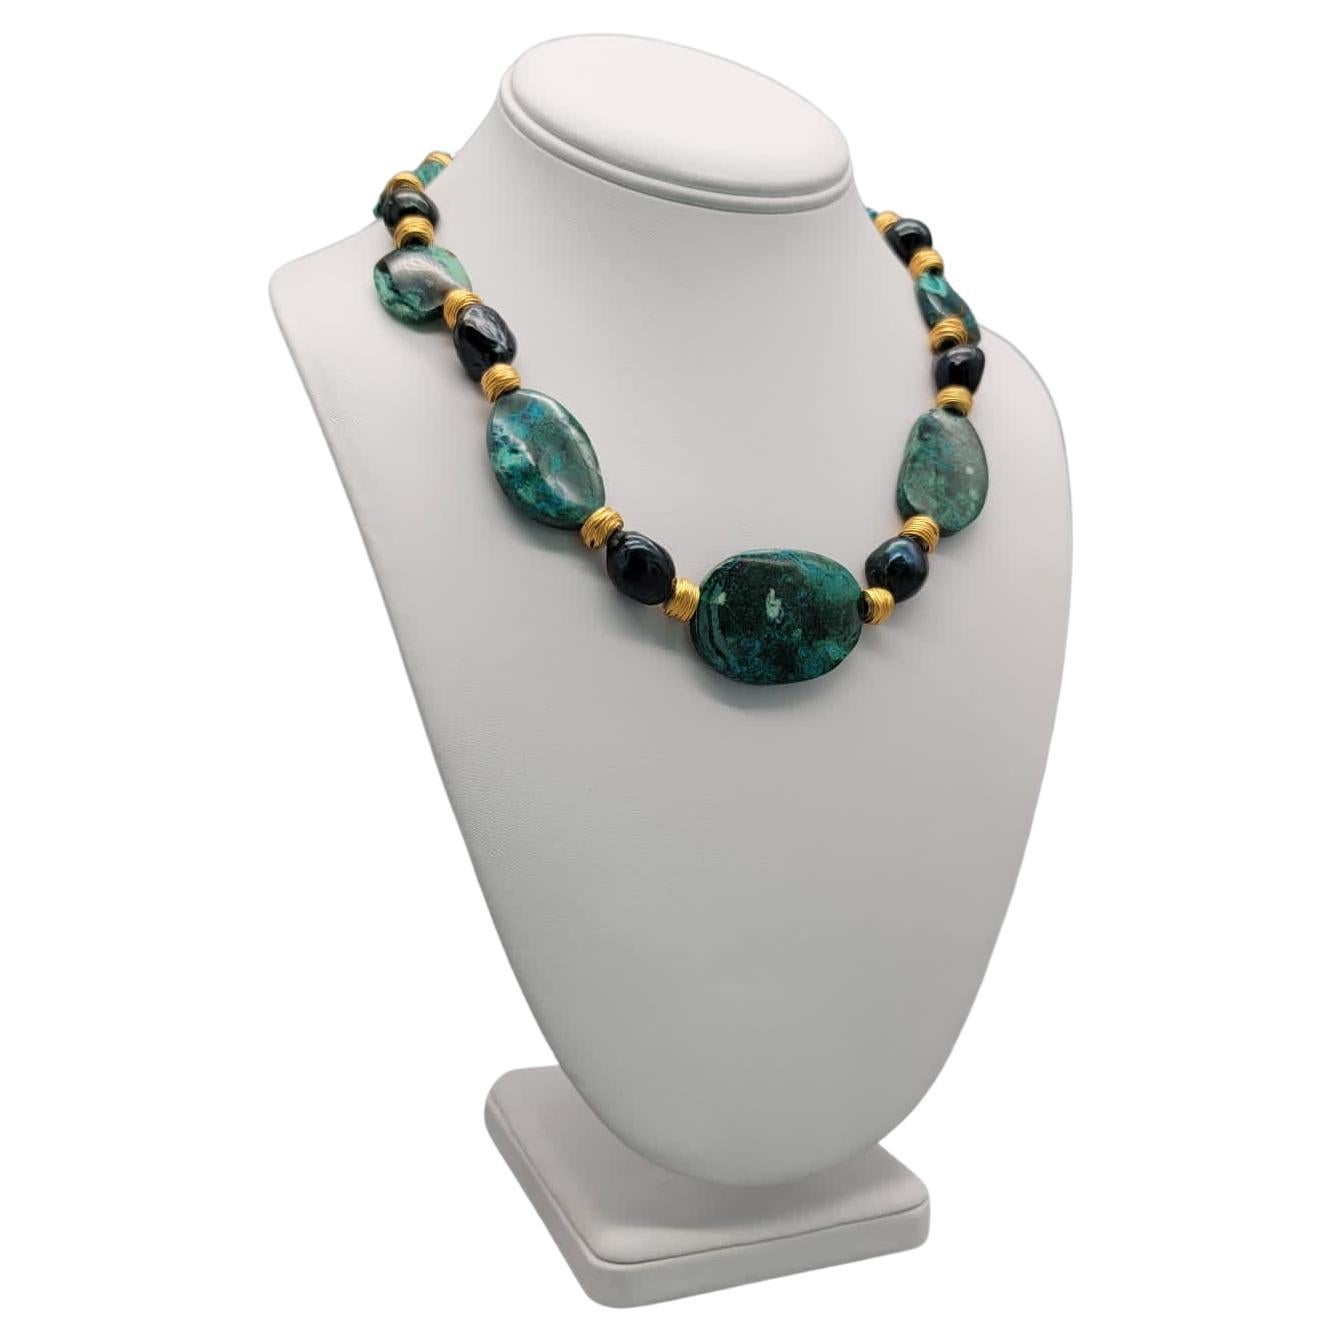 One-of-a-Kind

Gem Silica, also referred to as Chrysocolla Chalcedony, is considered the most sought-after chalcedony. The rich color (a mix of blue and green) is stunning and unforgettable. In this necklace, the gem silica plates are separated by